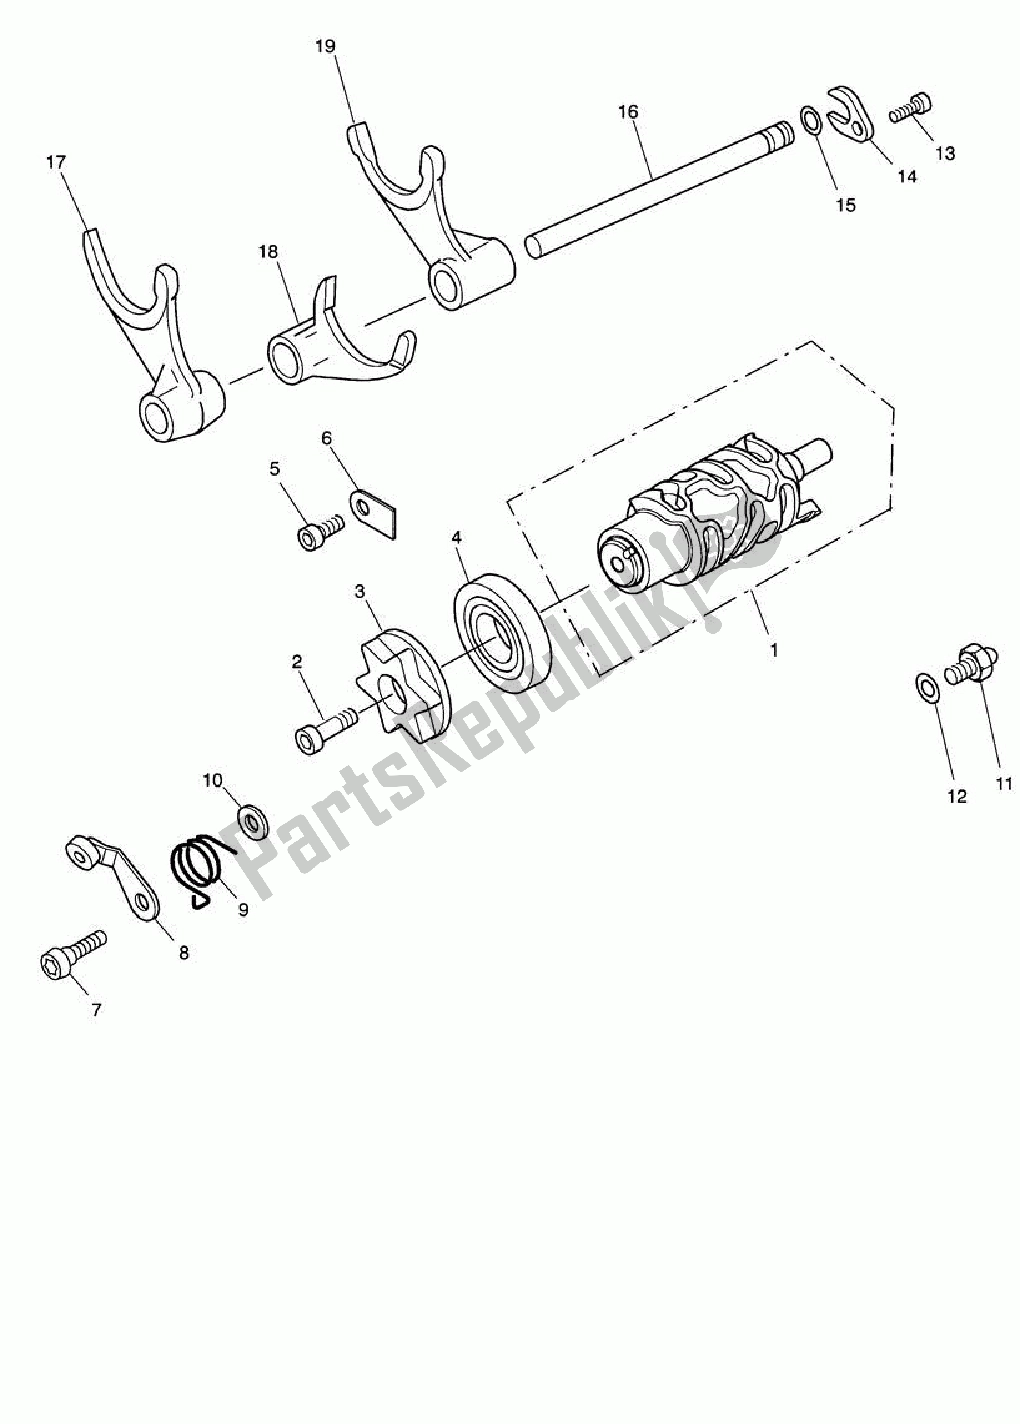 All parts for the Gear Selector Drum of the Triumph Speed Triple 1050 2008 - 2012